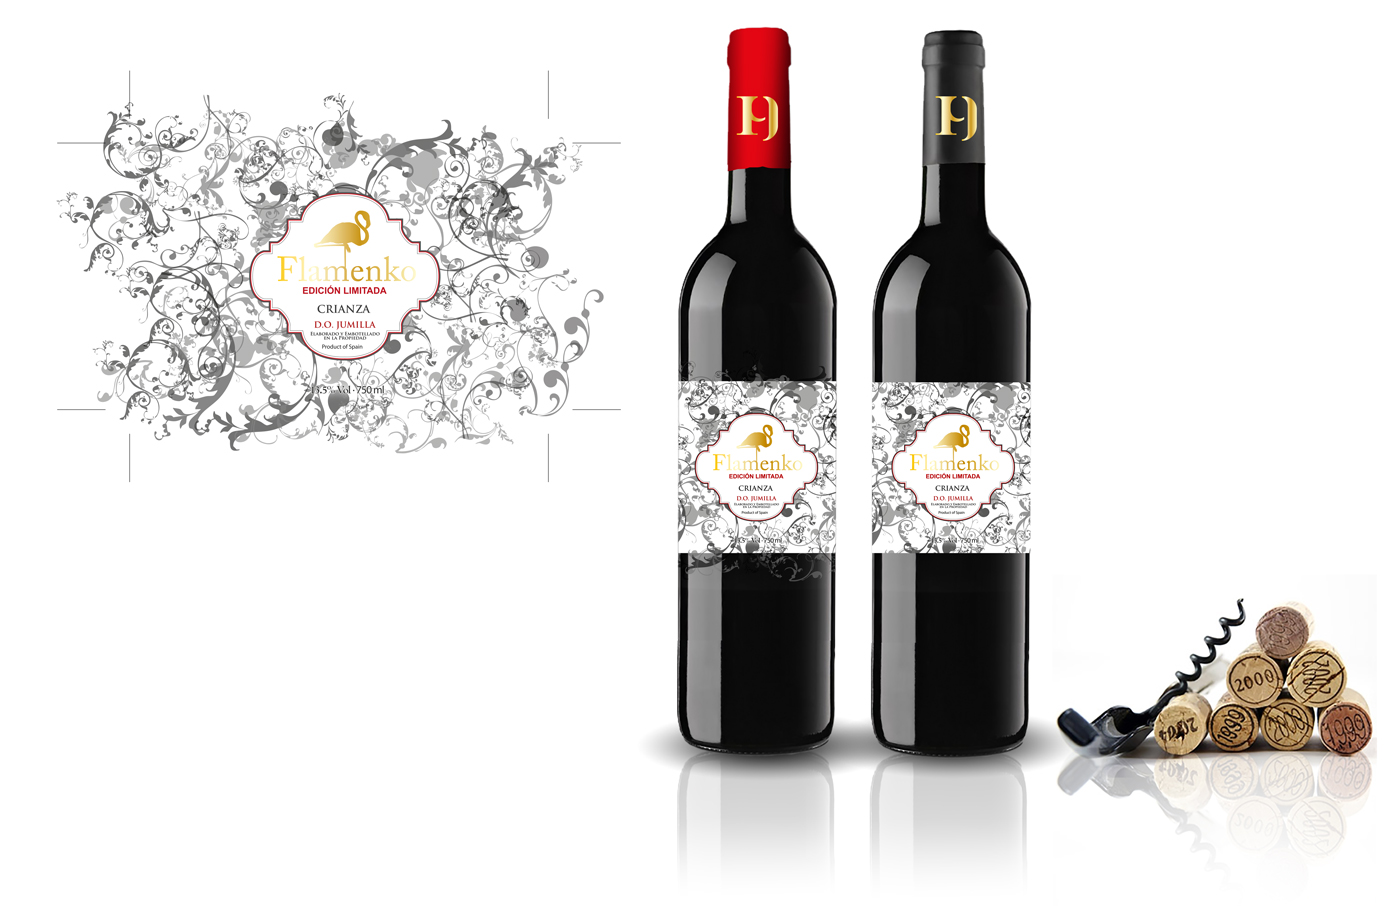 Portfolio of graphic and creative design works on wine labels and packaging for Spanish wine: FLAMENKO for export to Asian countries and China